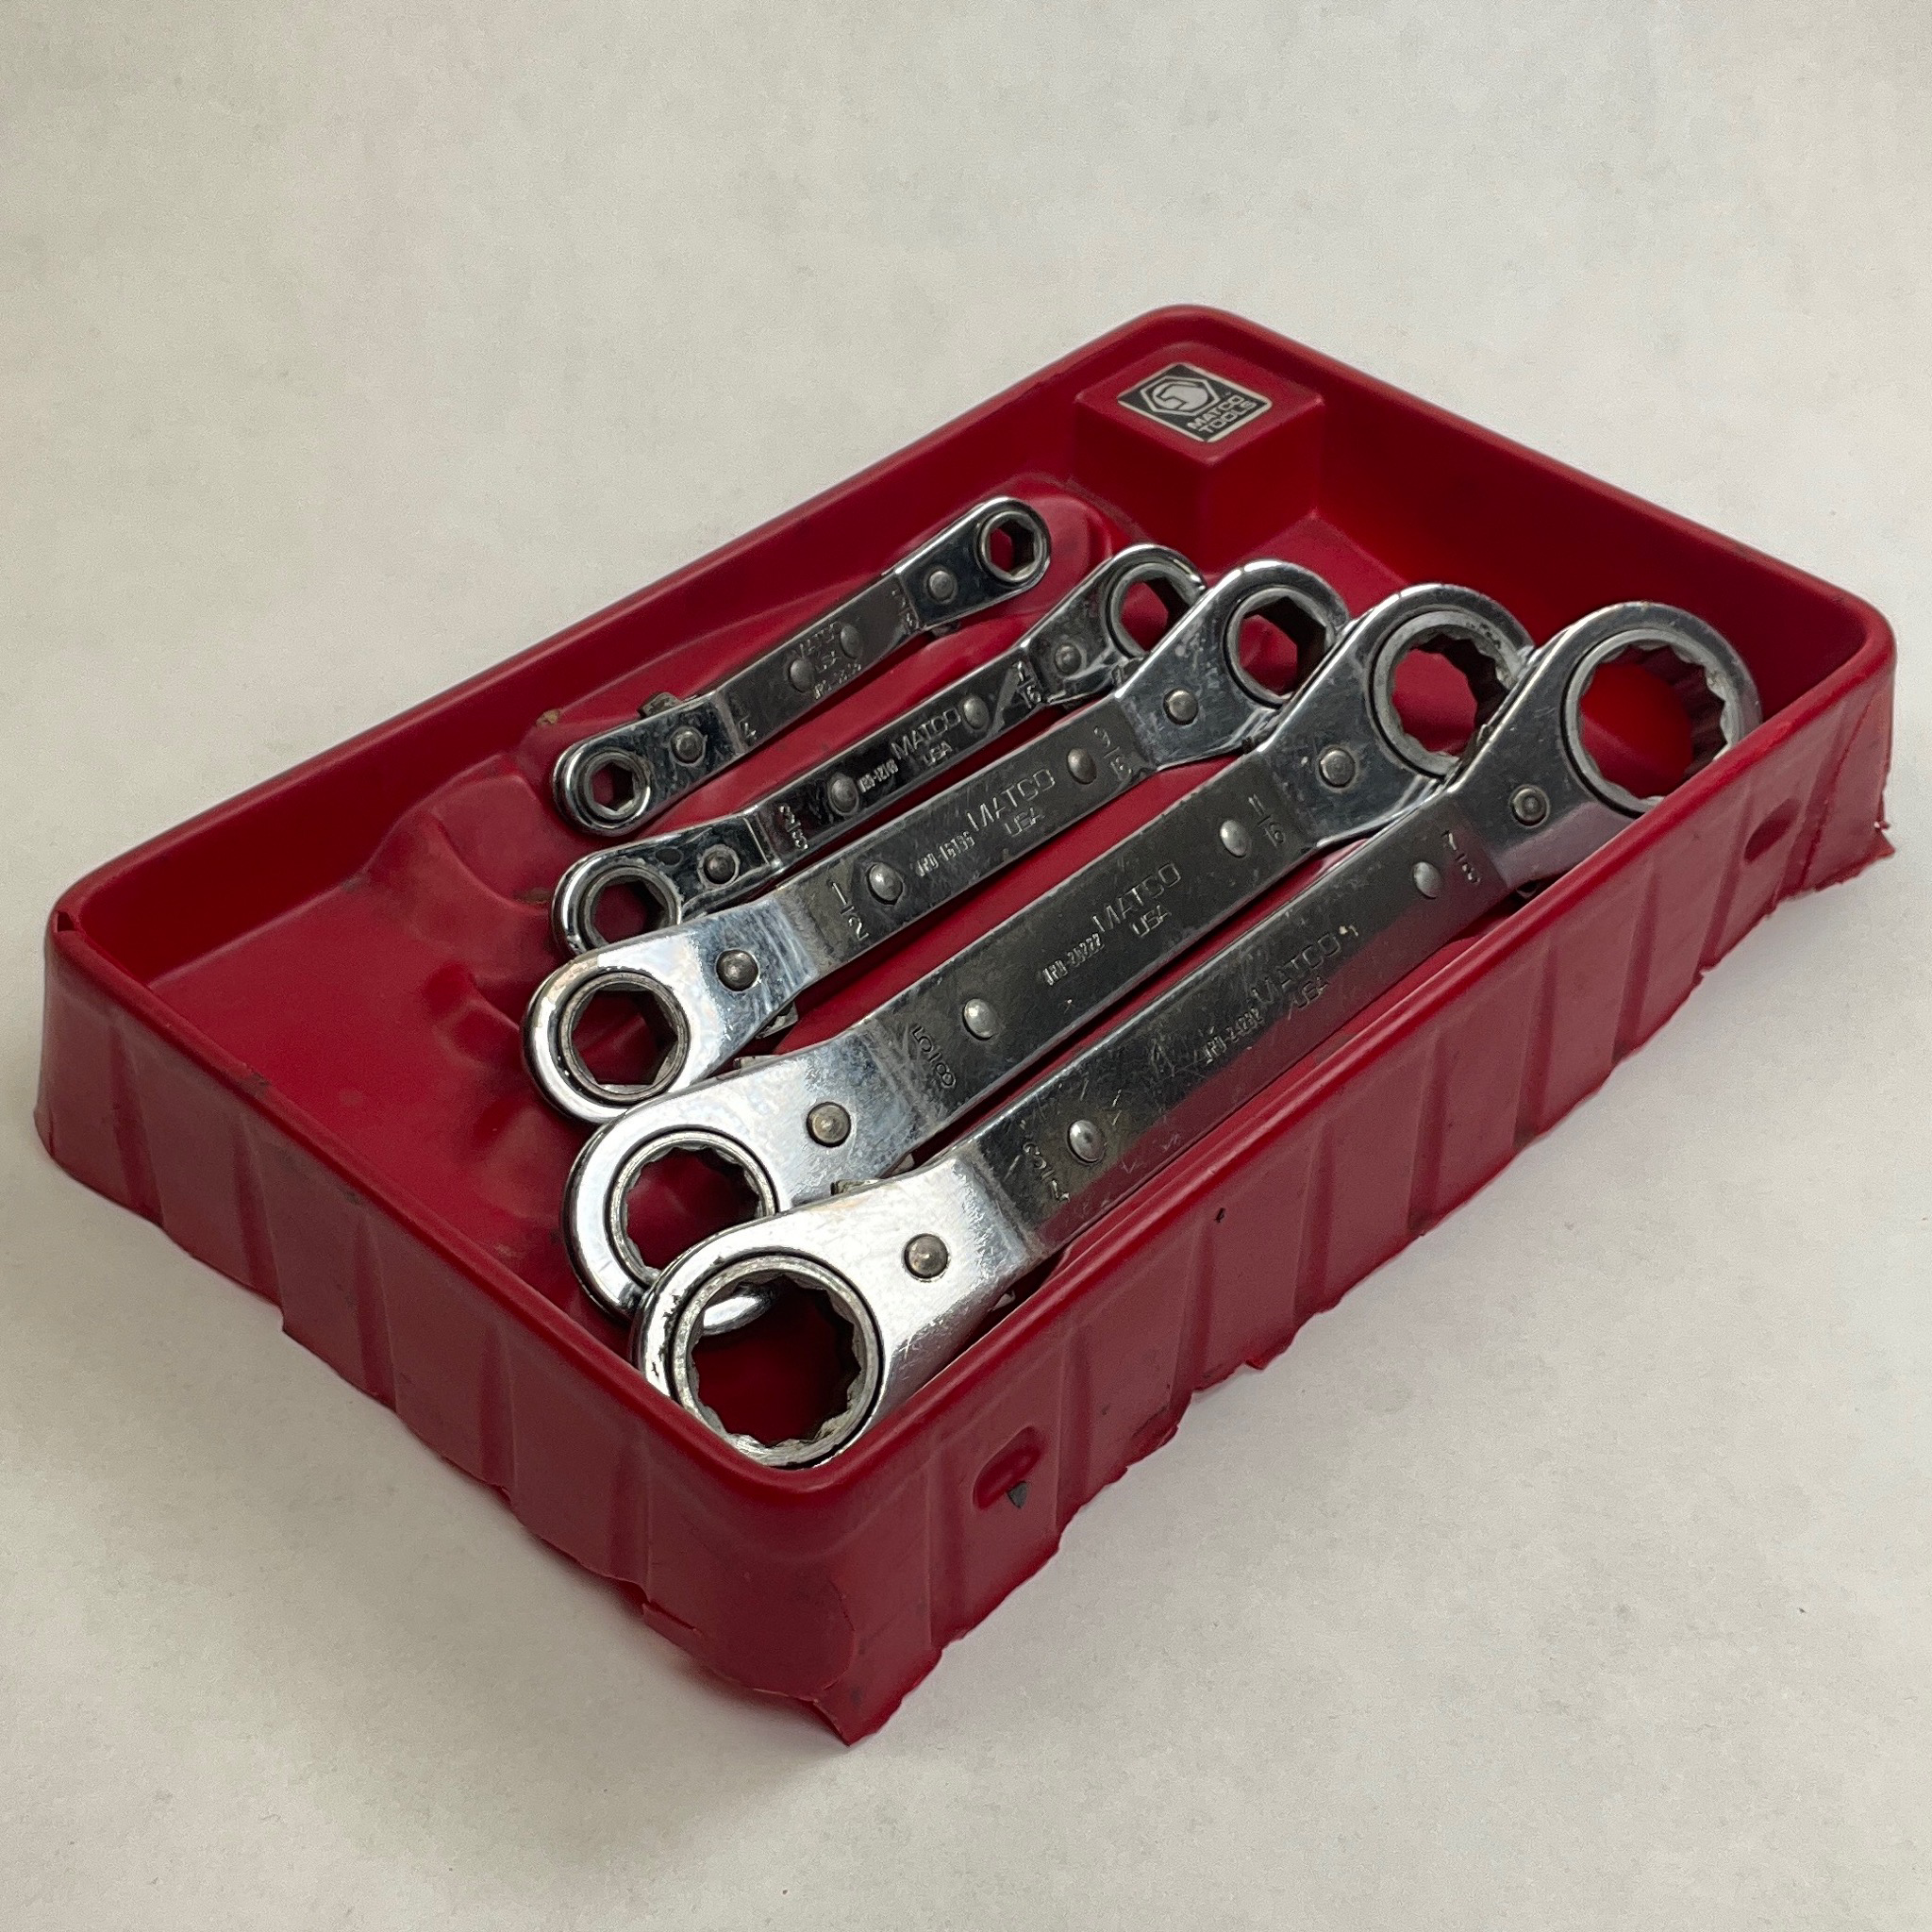 Wrench sets - Shop - Tool Swapper